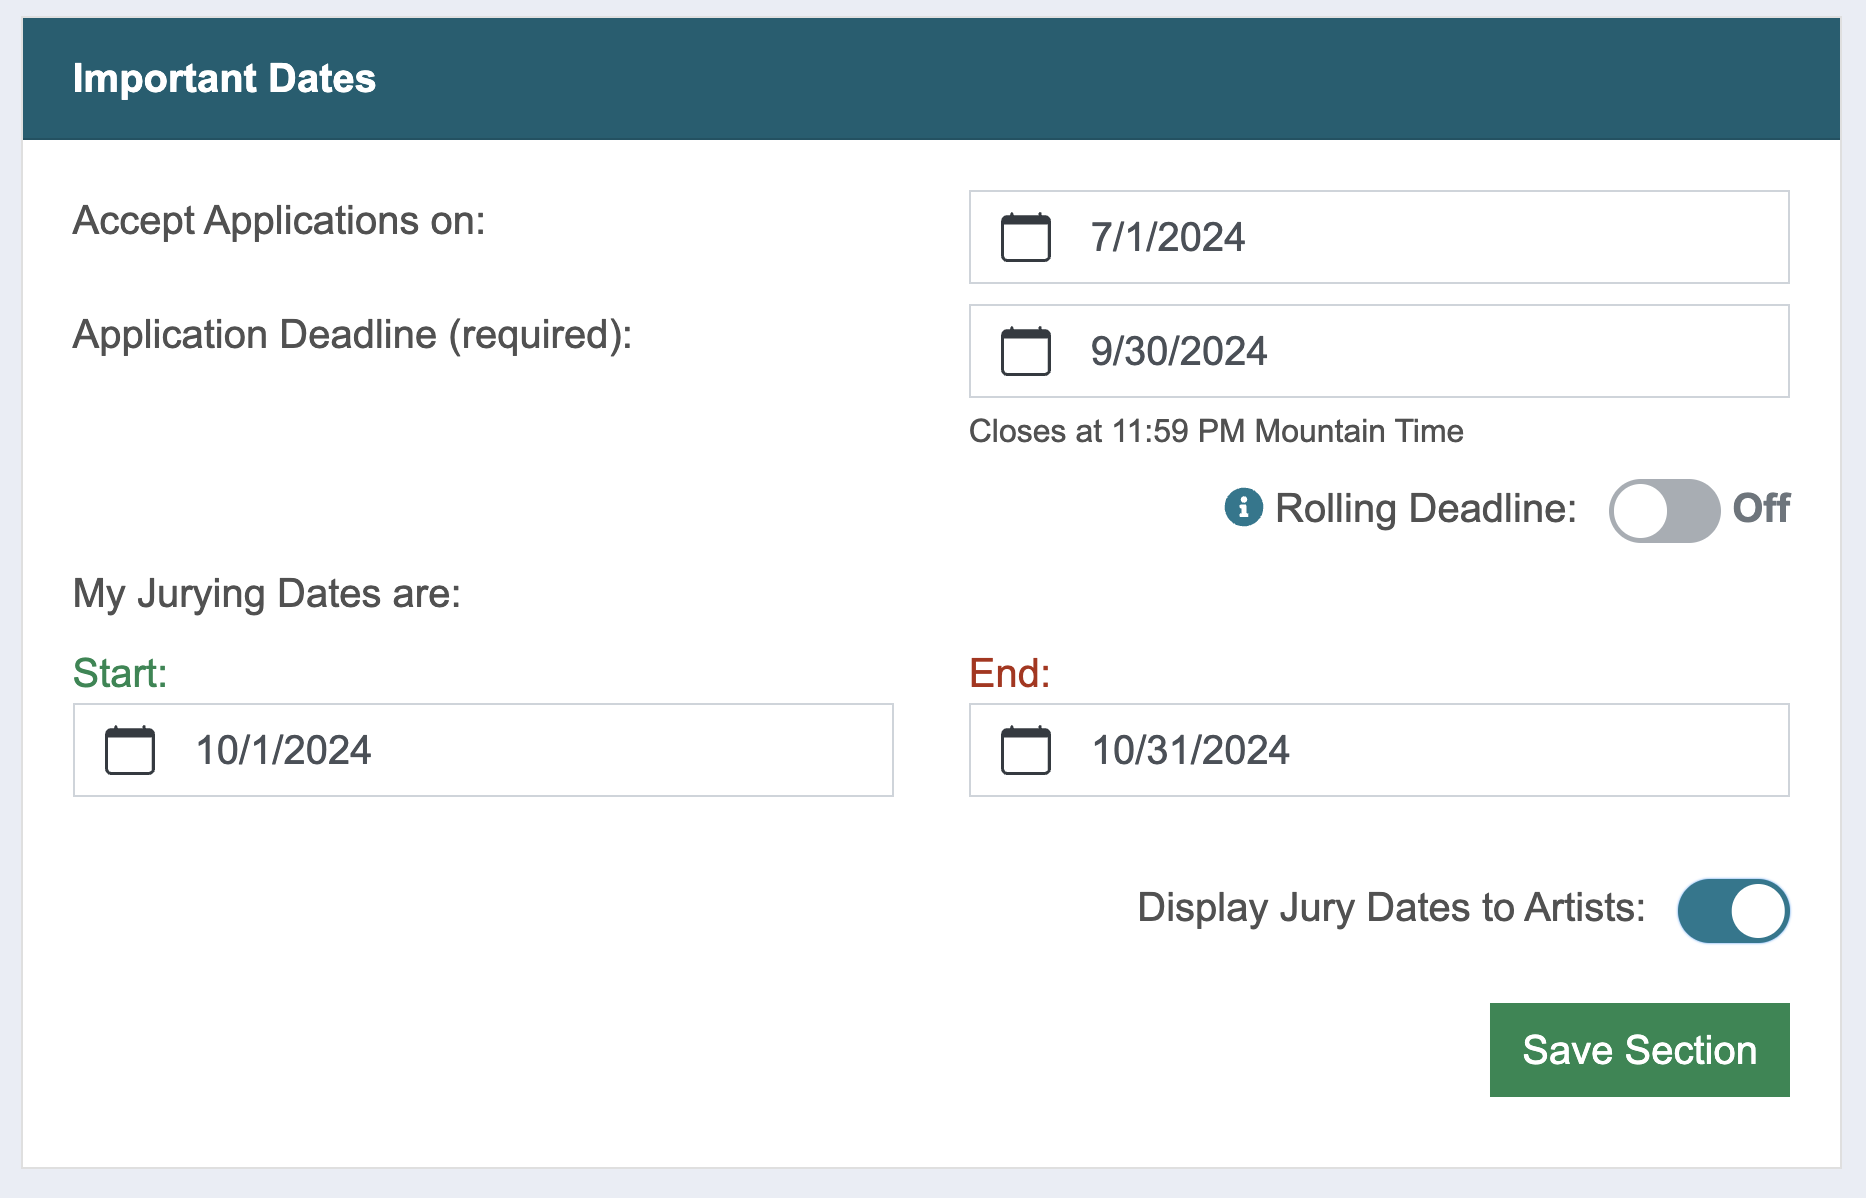 Screenshot of the important dates section where admins can set their app deadline and jury dates